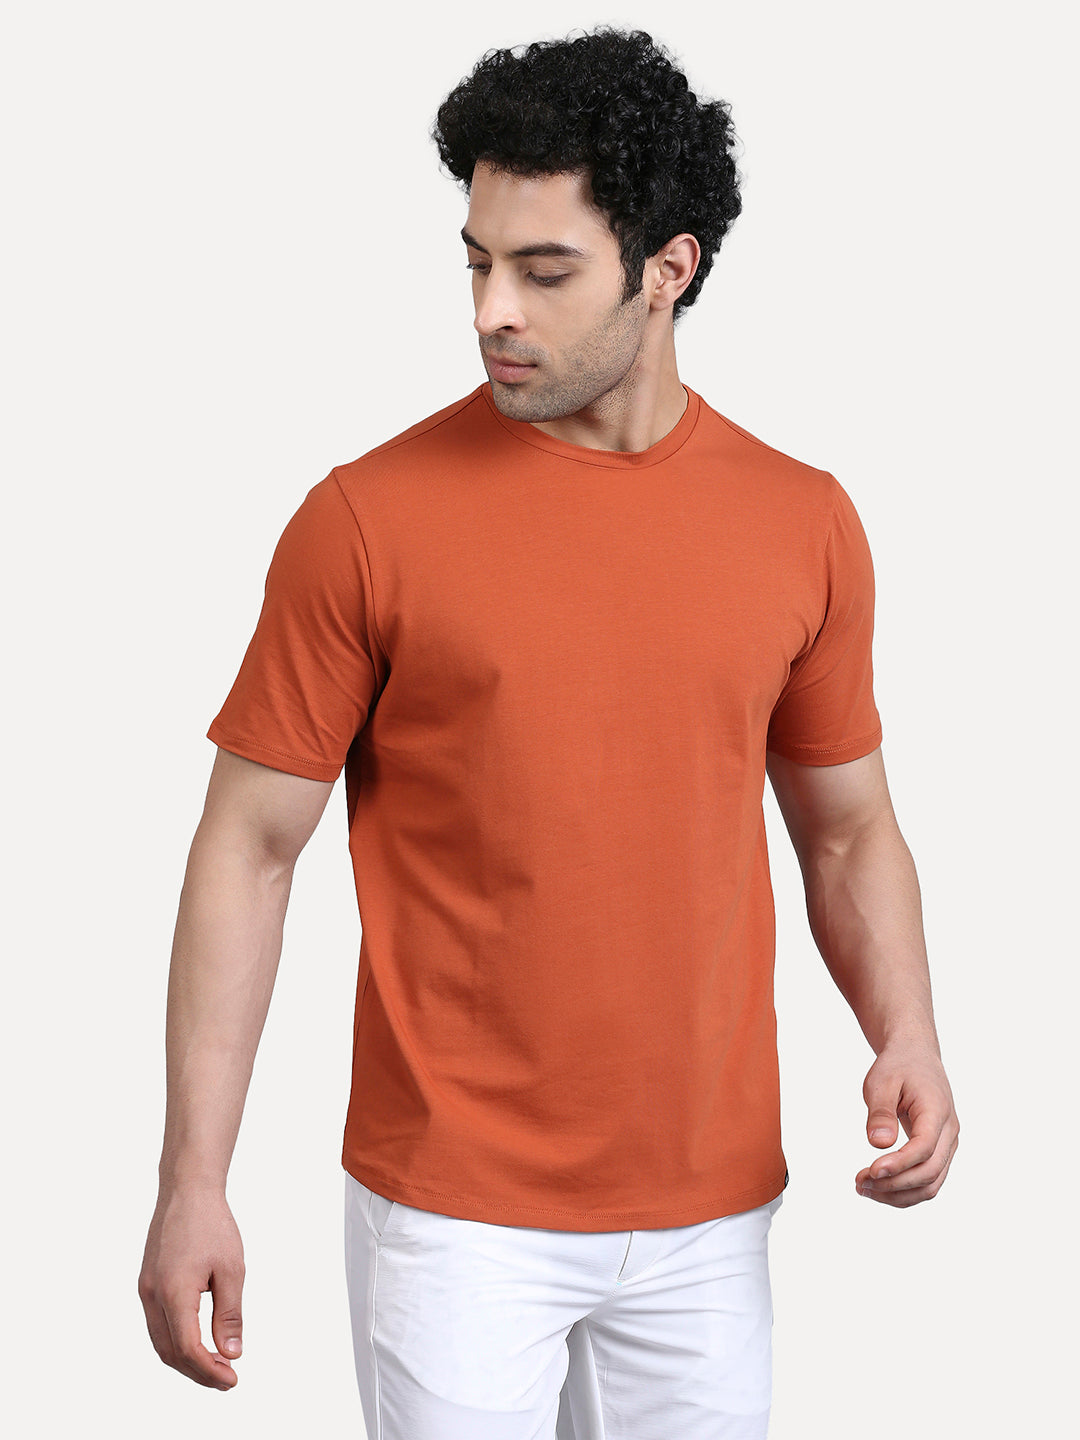 Baked Clay Round Neck Tee